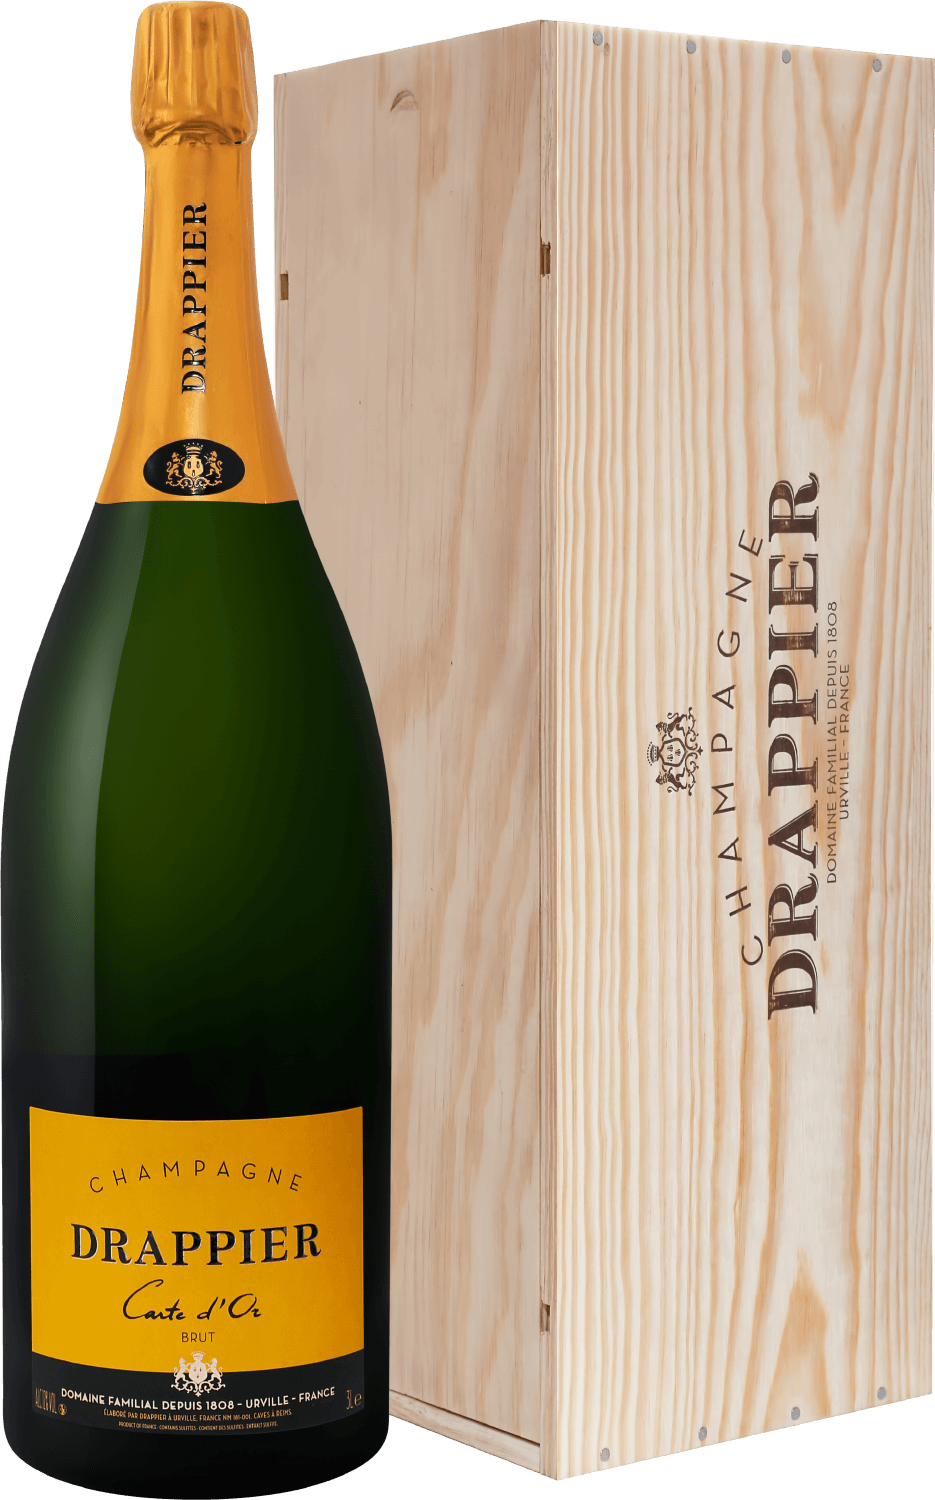 Drappier Carte d’Or Brut Champagne AOP in gift box drappier carte d’or brut champagne aop